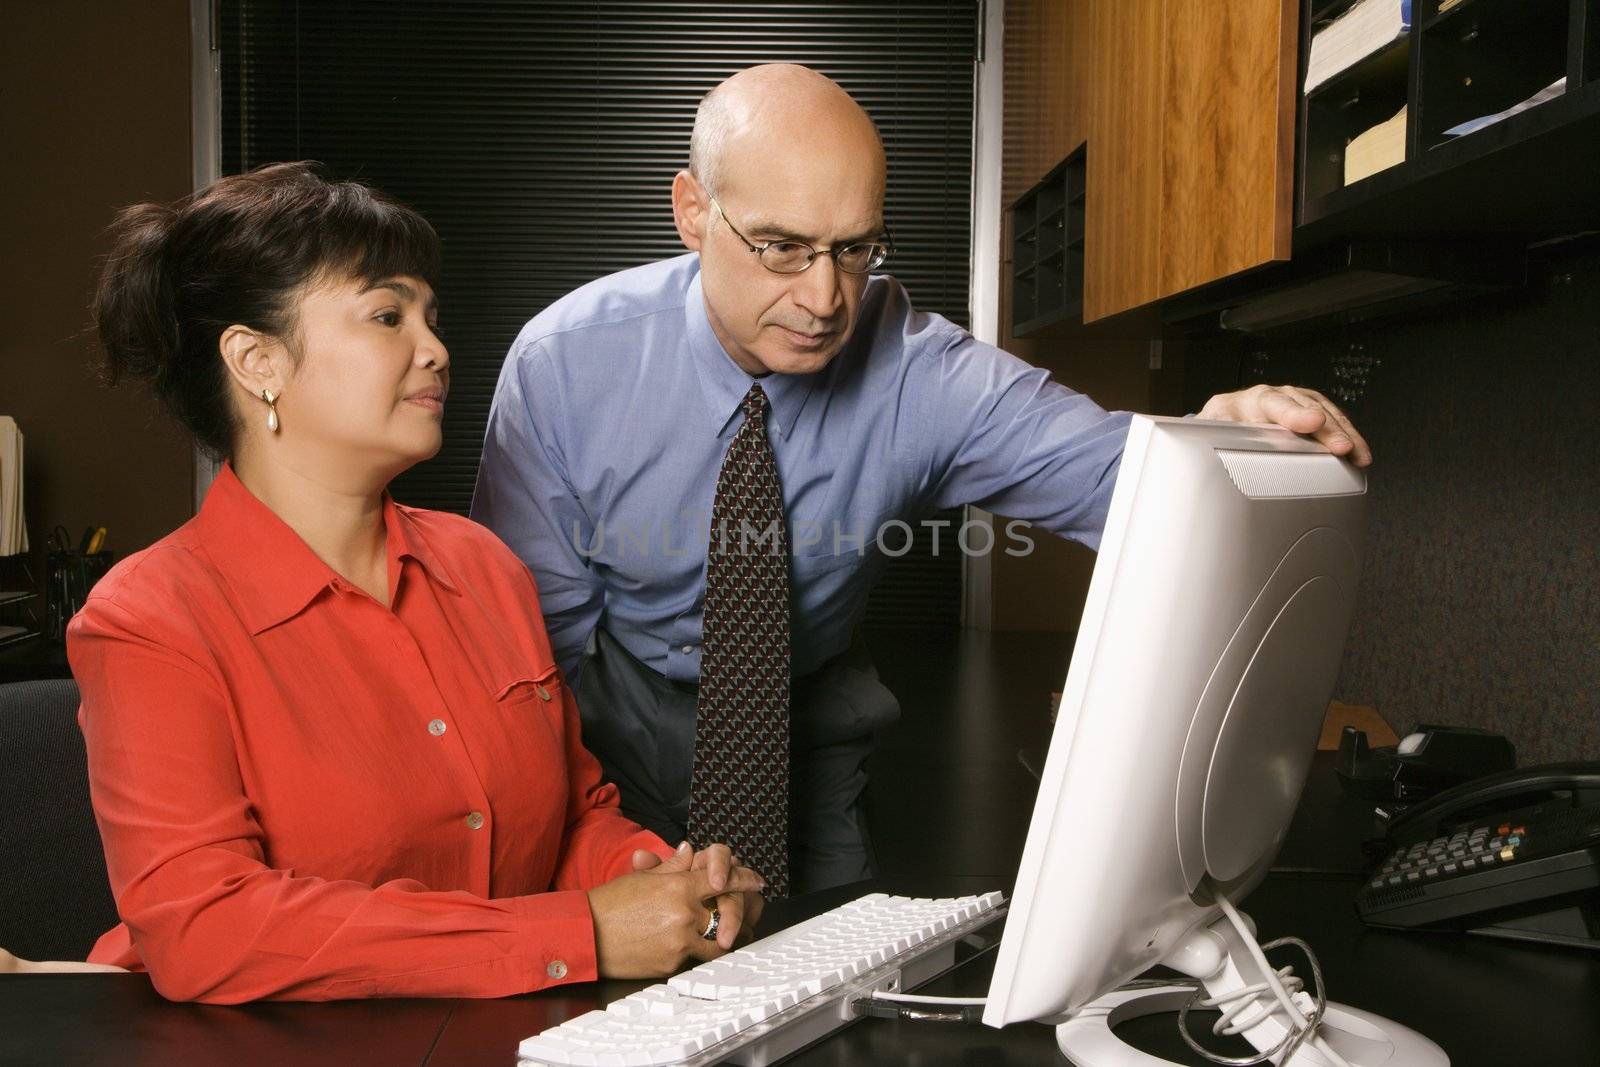 Businessman and businesswoman in office looking at computer monitor.